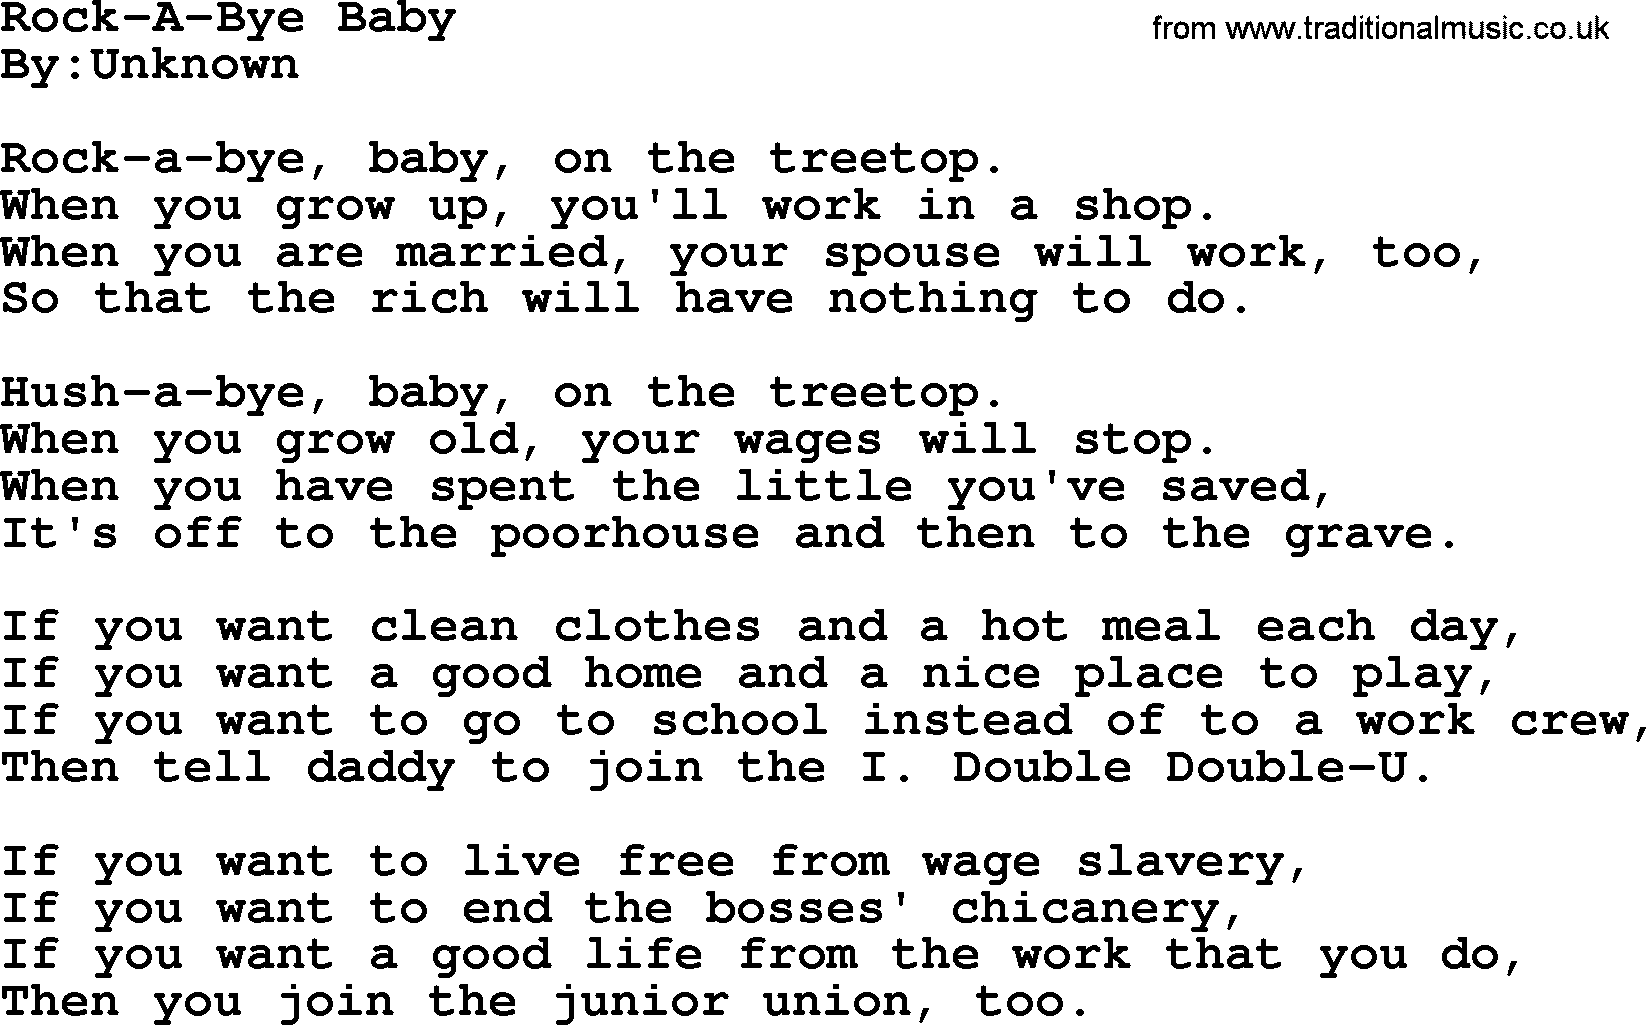 Political, Solidarity, Workers or Union song: Rock-a-bye Baby, lyrics